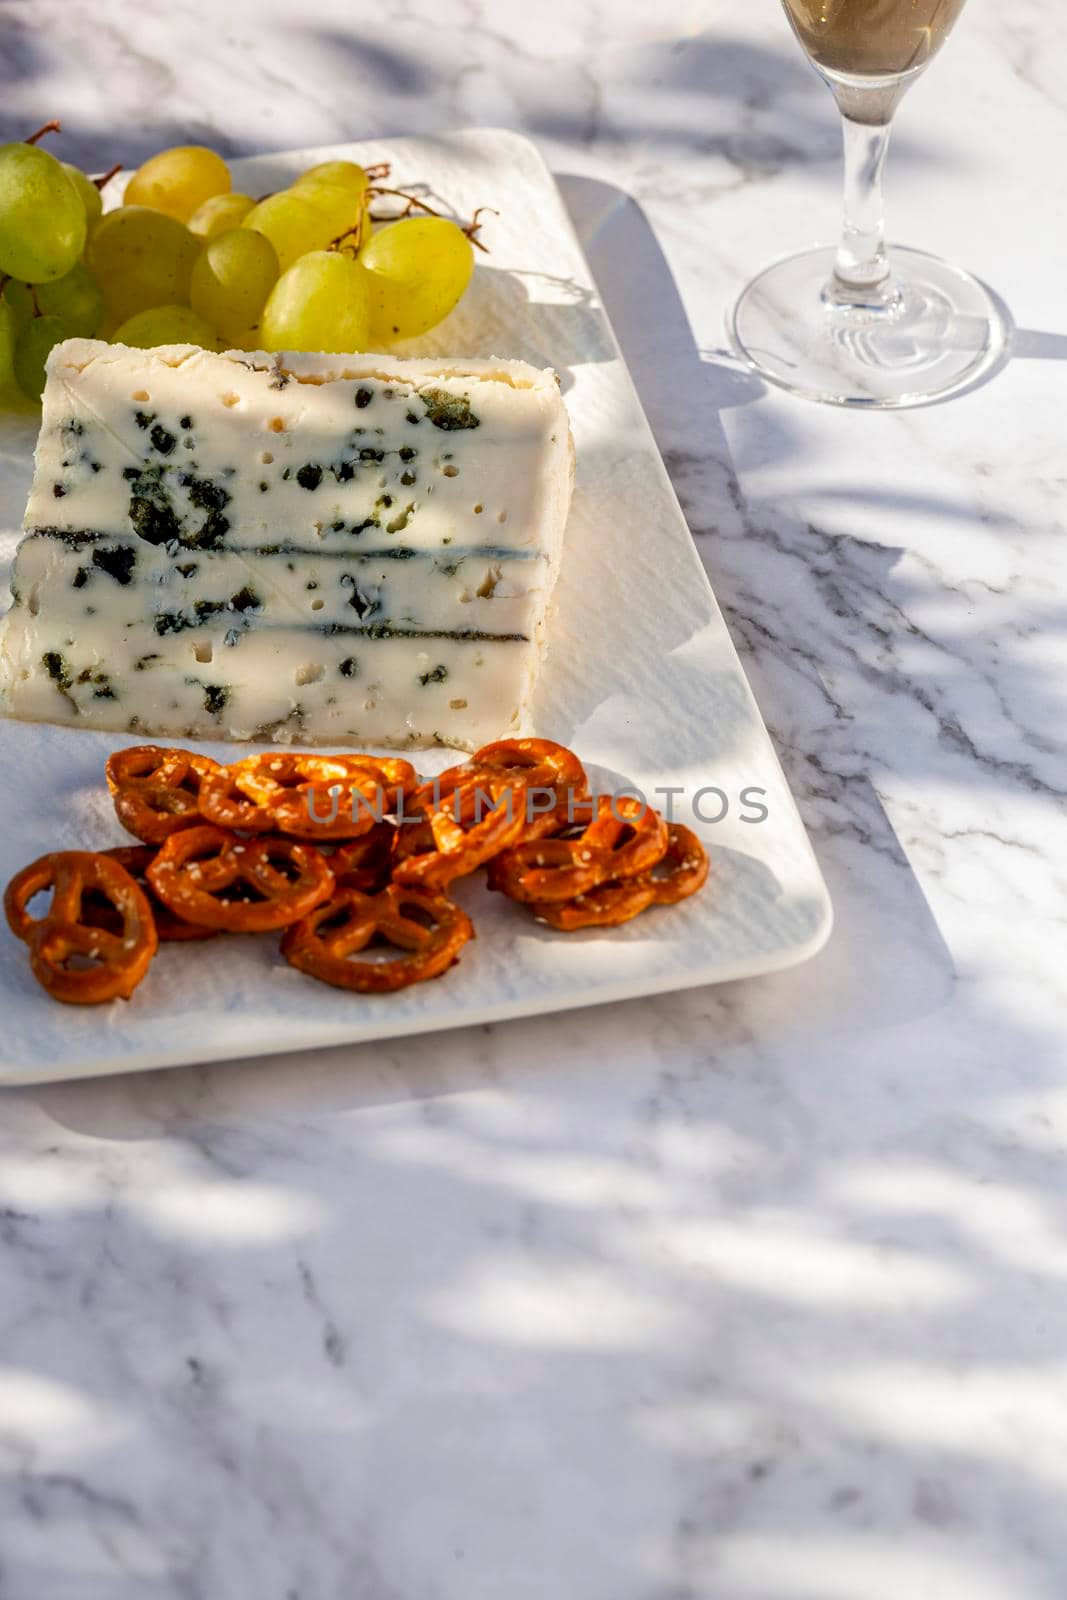 gorgonzola cheese served outdoors with green grapes, snacks and wine, hard light